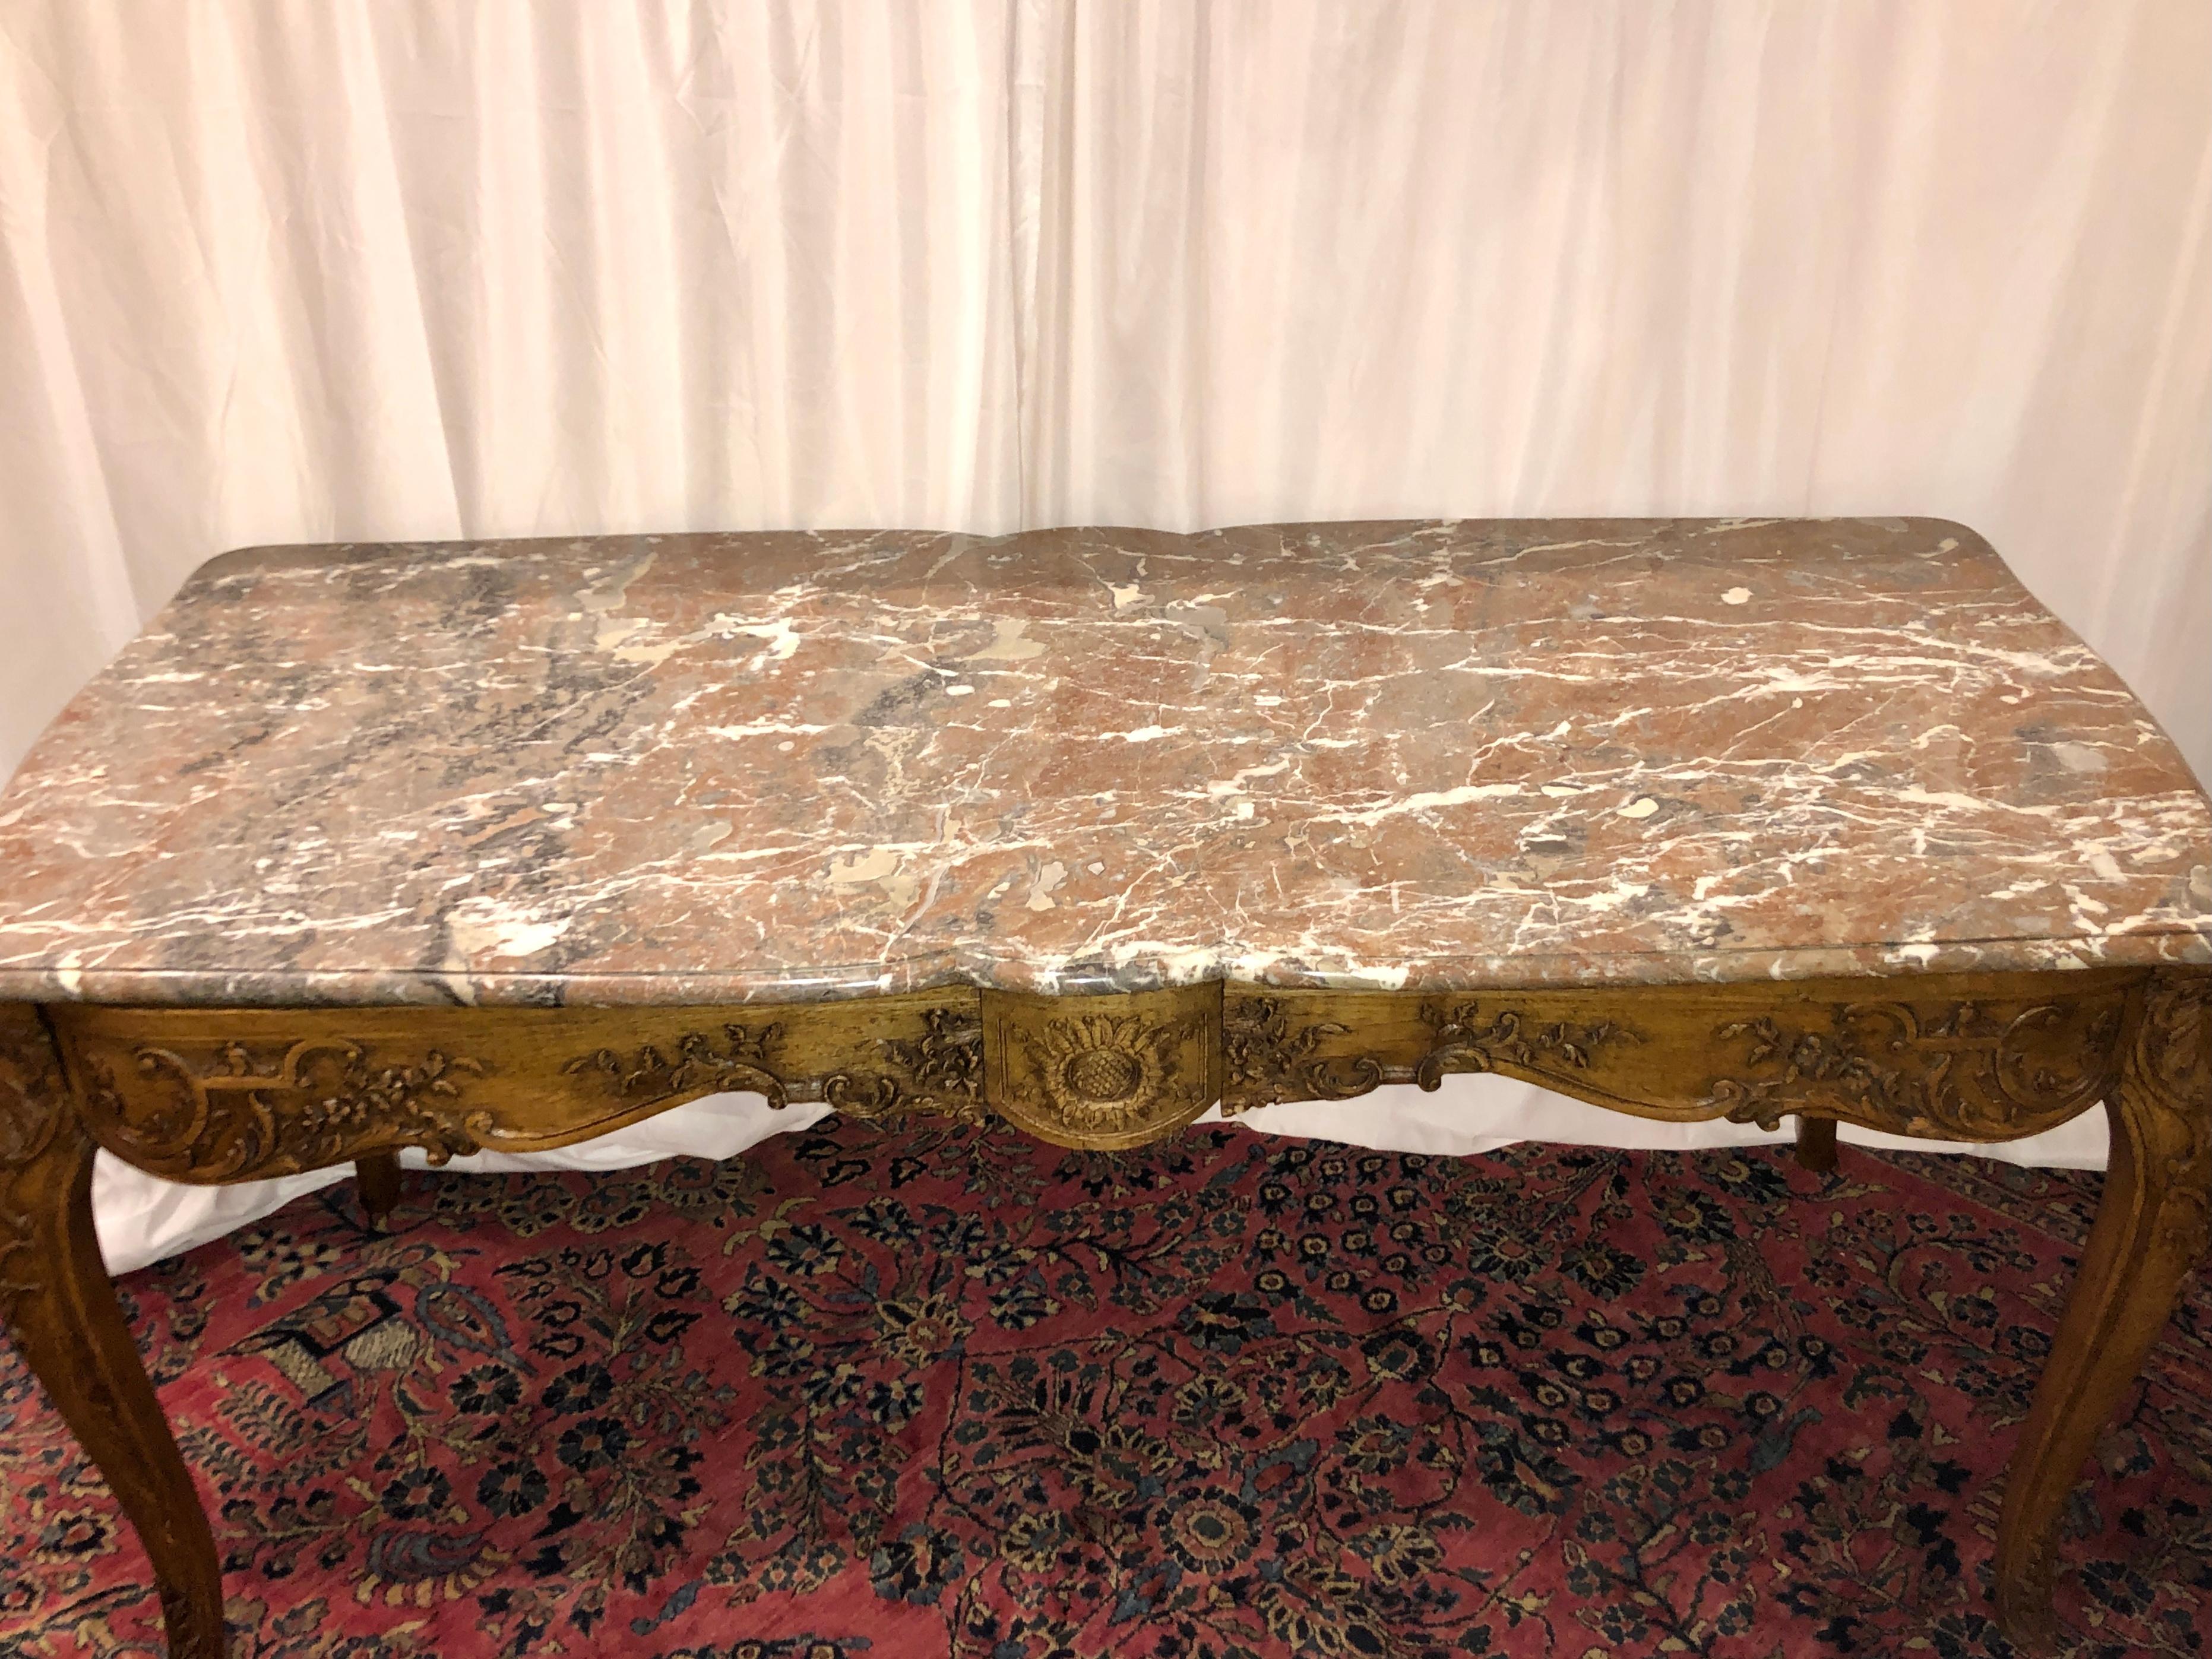 Antique French regency marble top and carved wood center table.